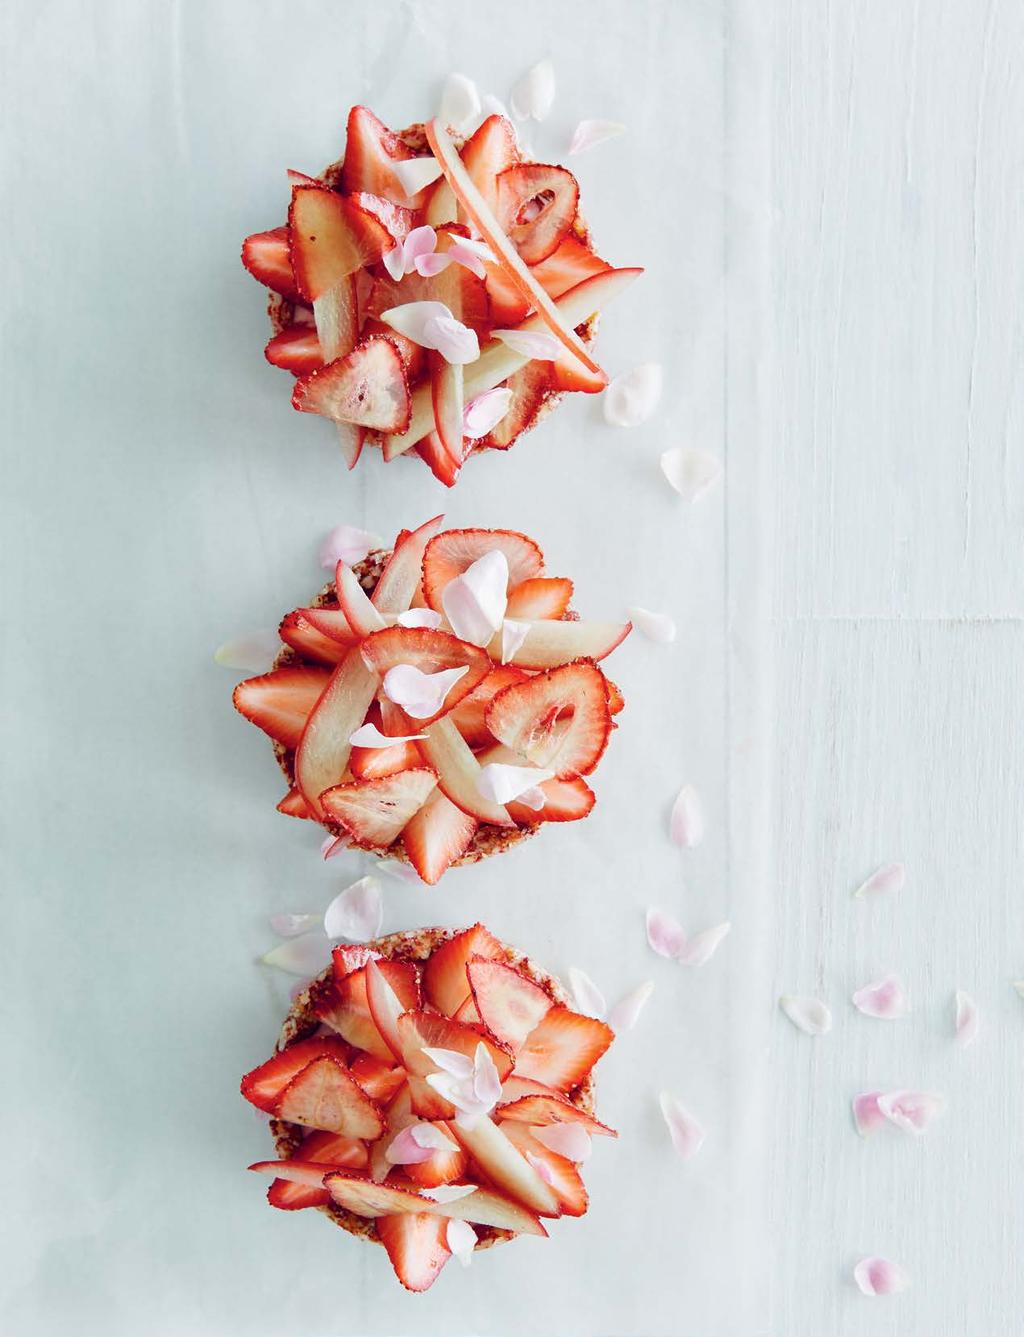 Rose apples add a crisp texture and delicate scent to this dish, contrasting against the smooth cashew and strawberry filling.